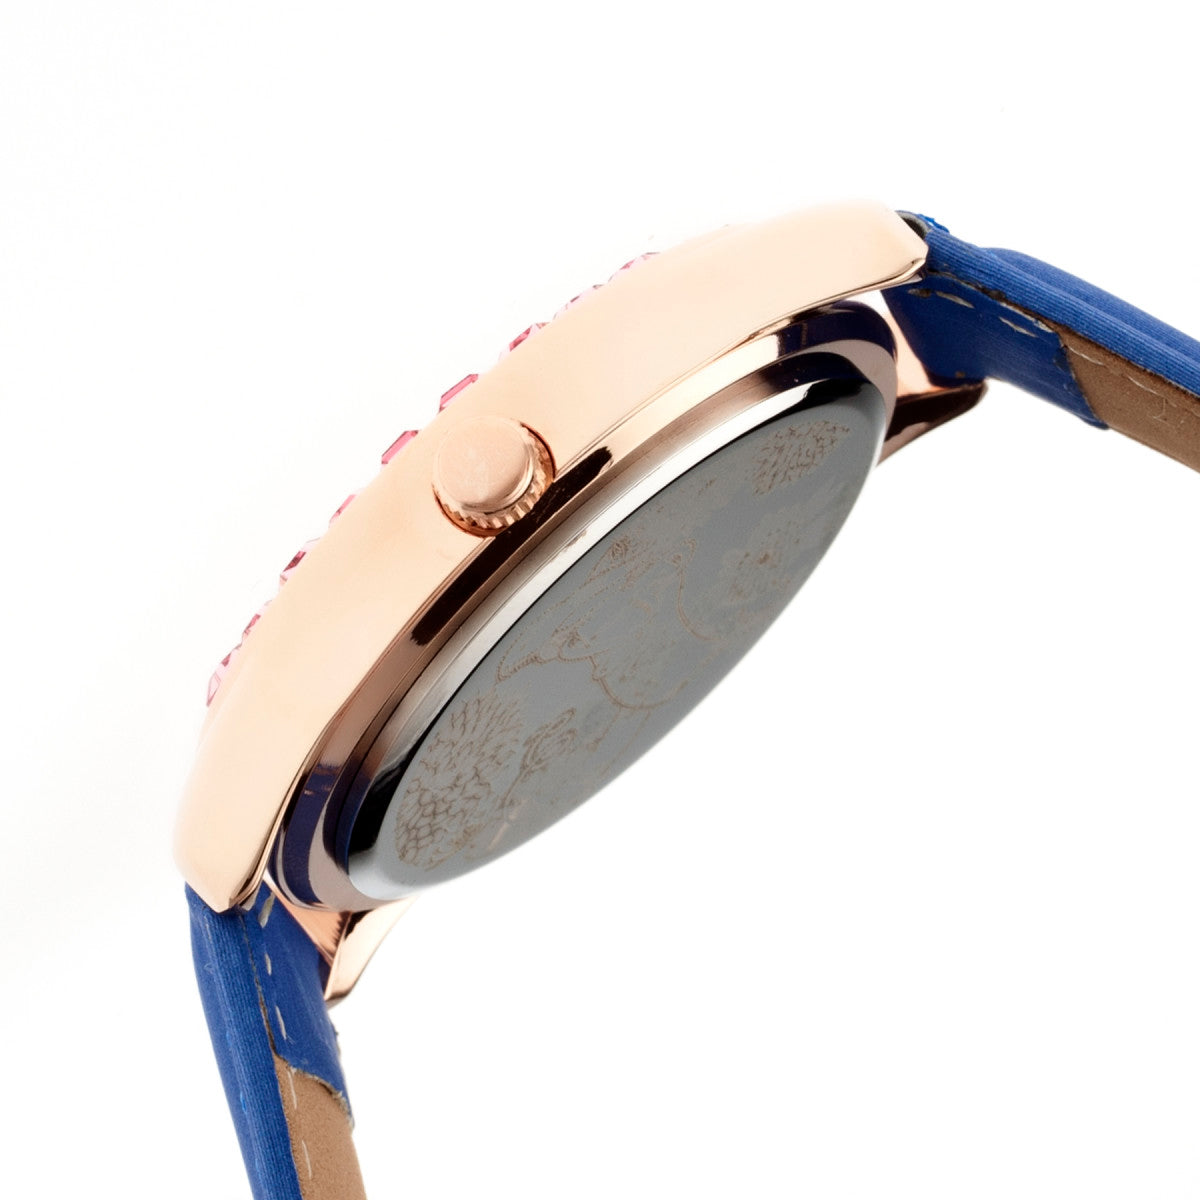 Boum Chic Mirror-Dial Leather-Band Ladies Watch - Rose Gold/Blue - BOUBM2004